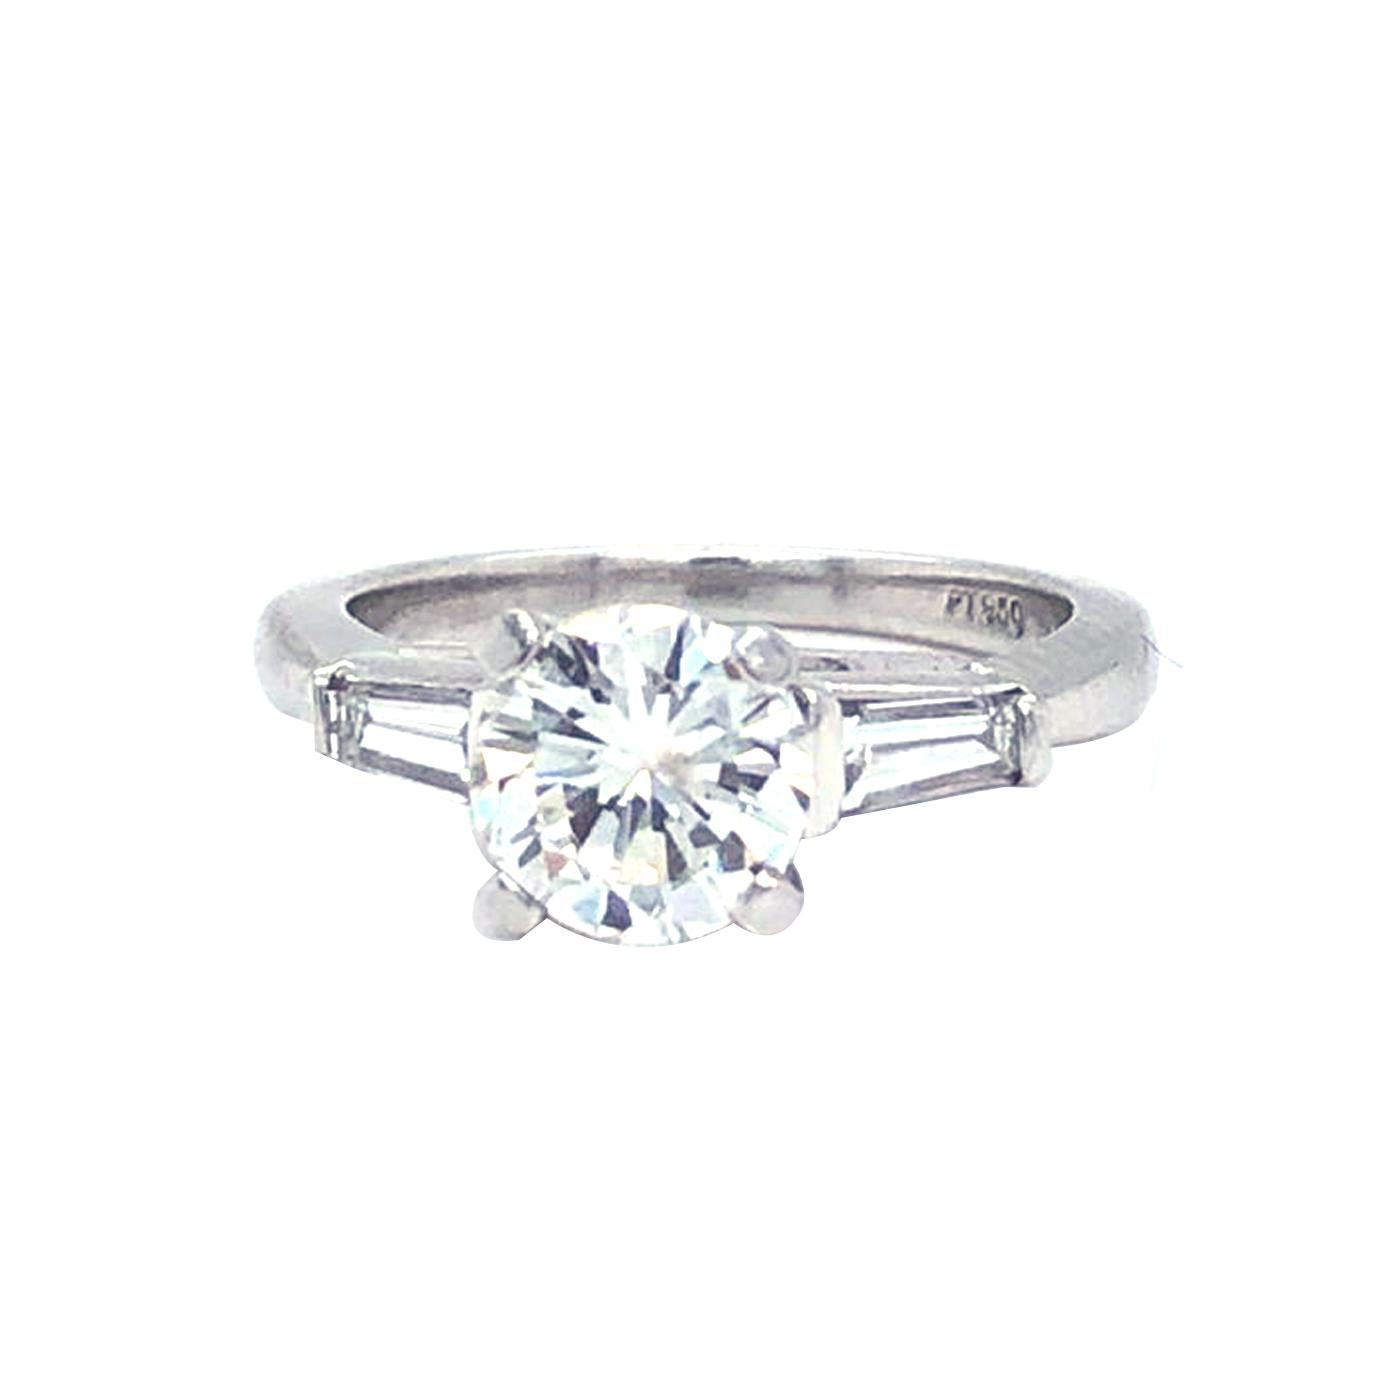 Classic Platinum Diamond ring 1.03 Carat center Round Brilliant  H - Color, Si2  Clarity, and accented by two tapered baguette-cut diamonds, Totaling 0.35 carat H color, VS1 - Clarity, The ring weighs 3.2 grams, and is currently size 6, with easy